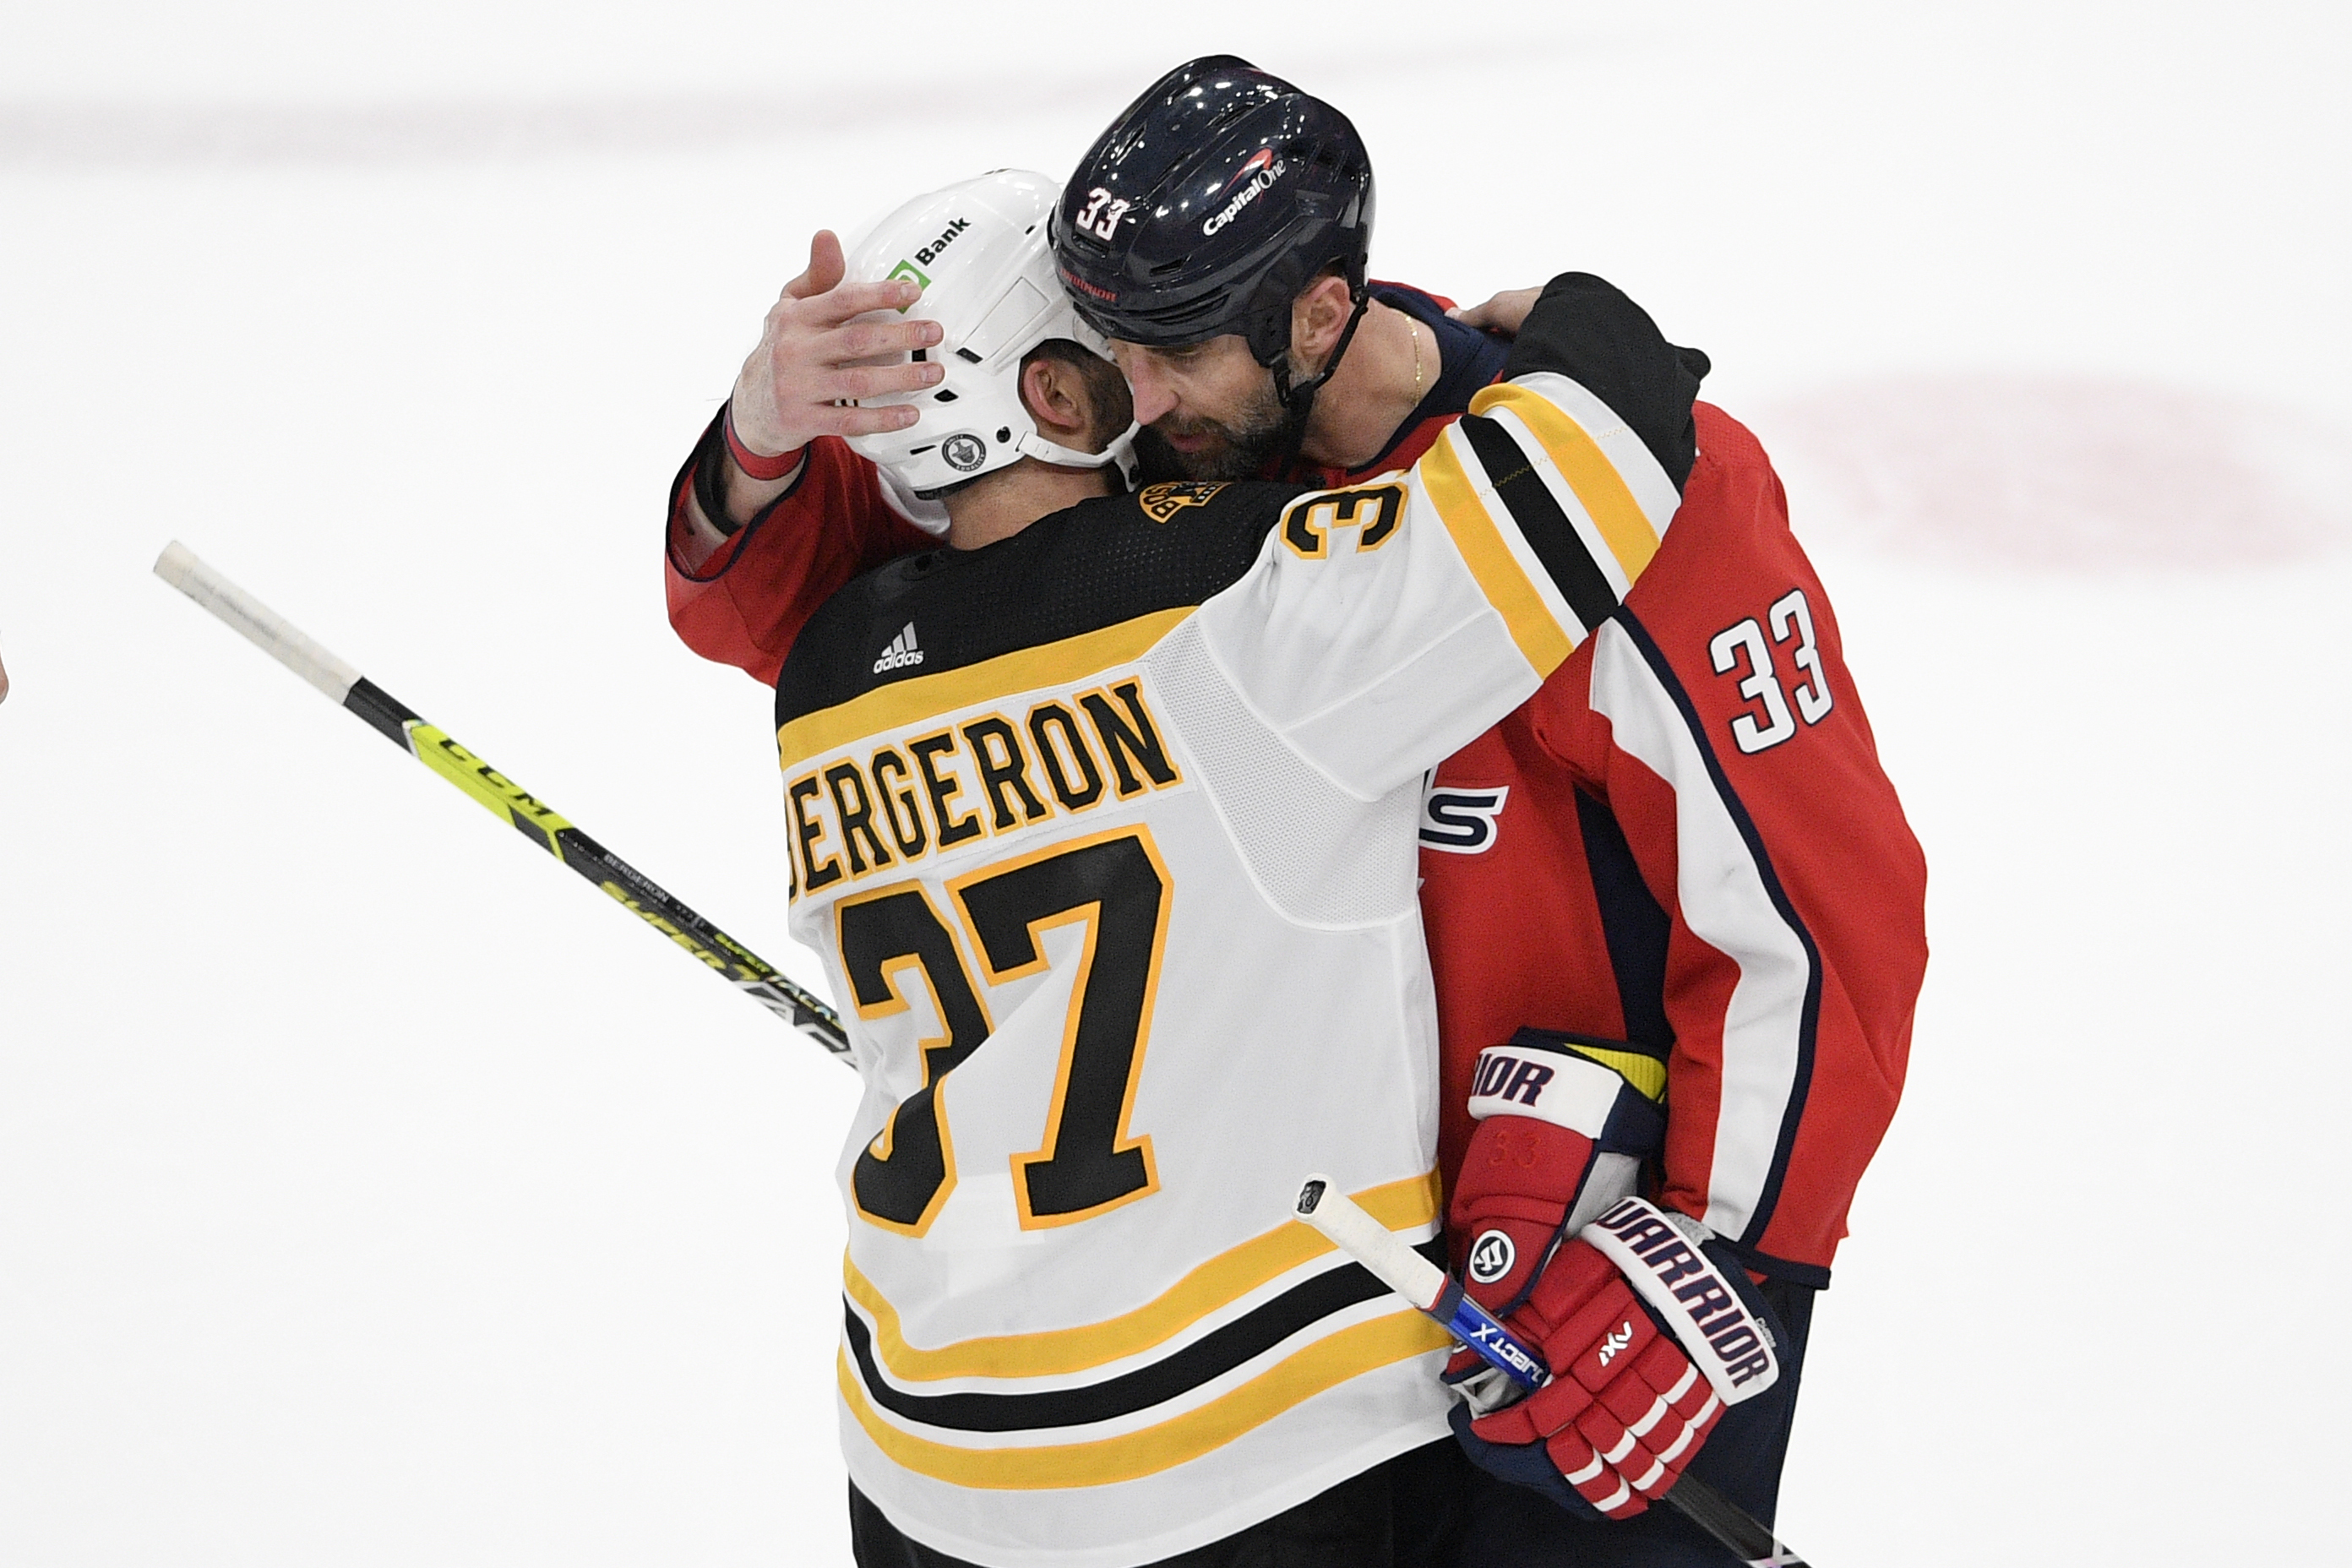 Zdeno Chara knows he can still play, but it's time to be home with family  - CBS Boston